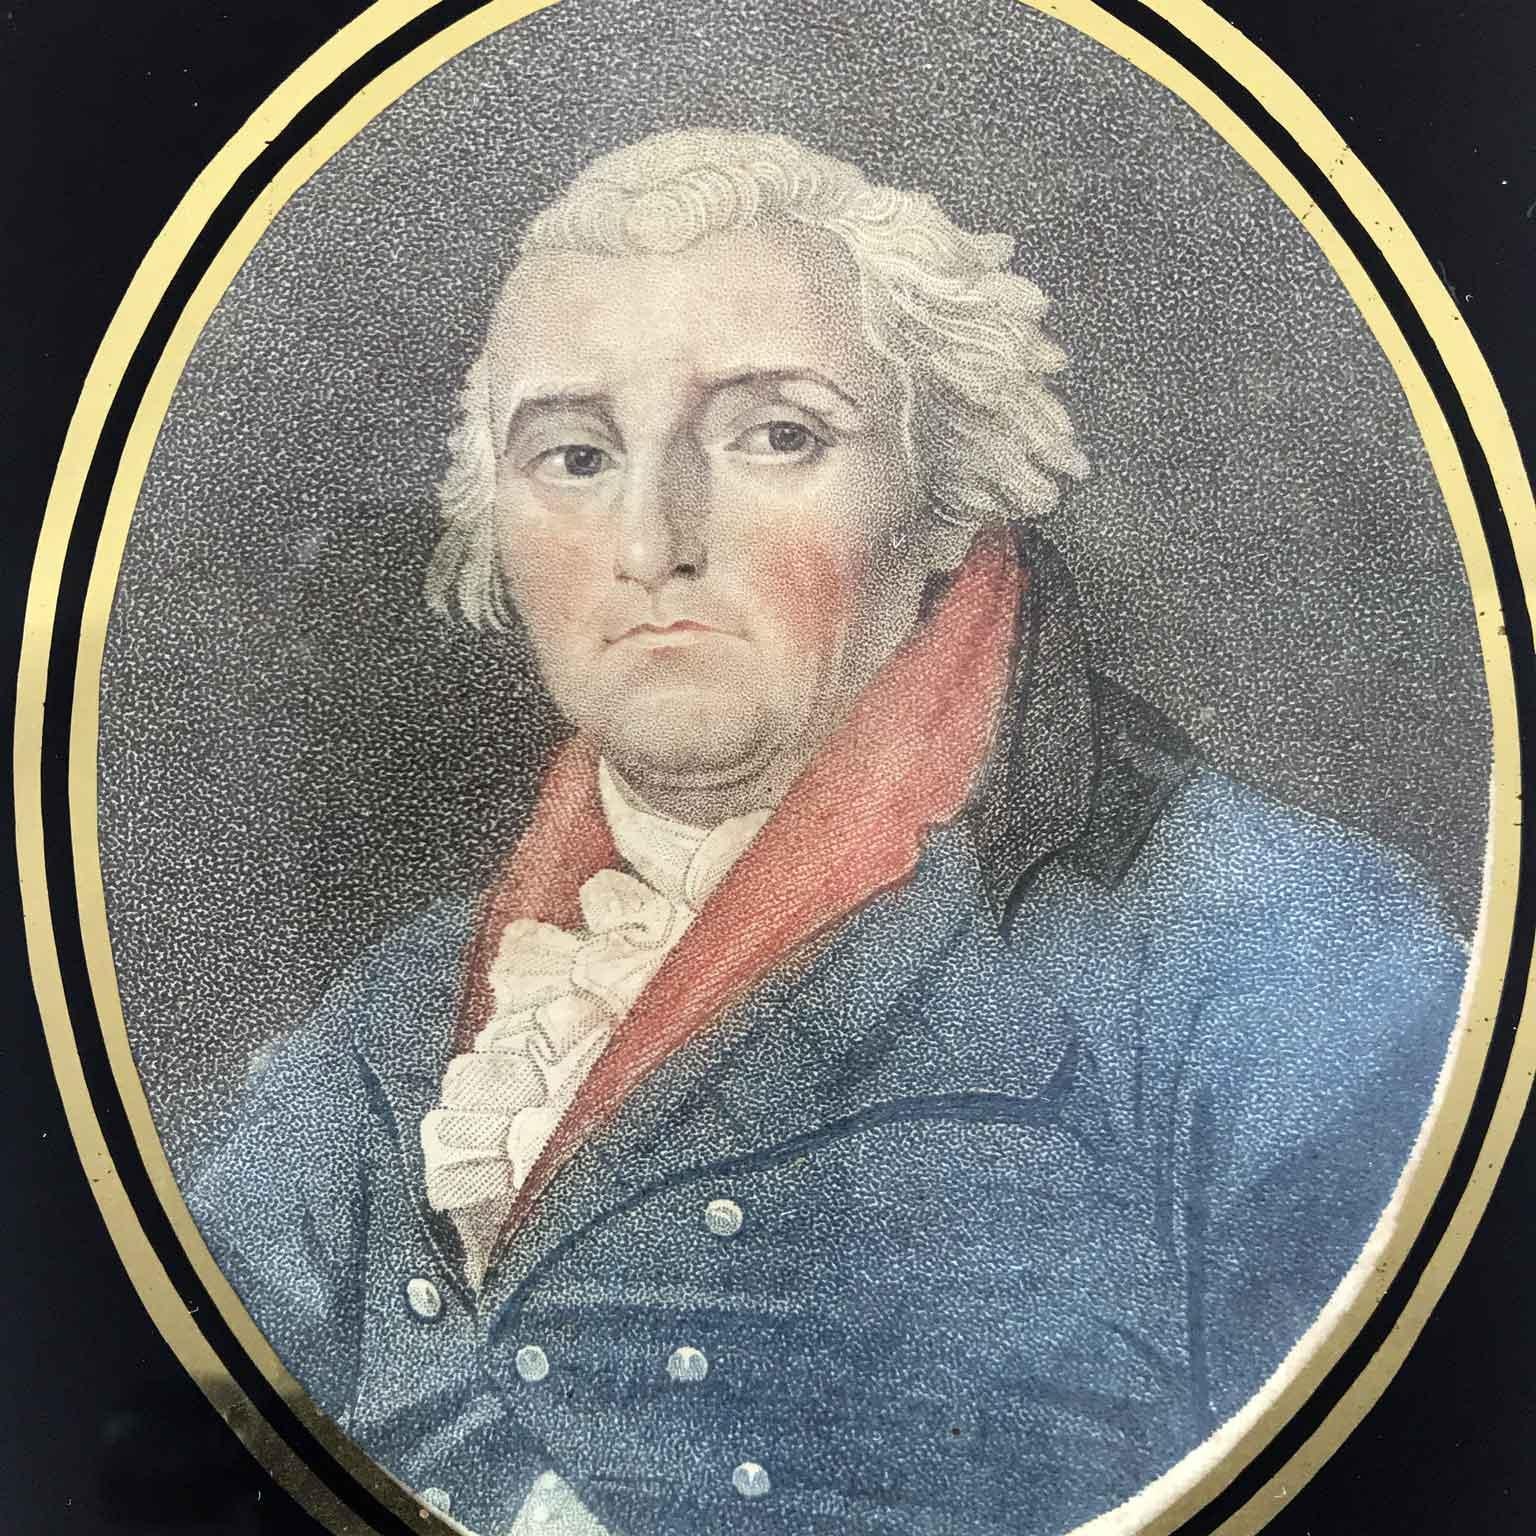 18th century Philip James de Loutherbourg Portrait English school miniature etching on paper, of oval shape, set in a black and gold decoration frame. In good condition, original water-colour, French origin, dating back to late 18th century.
Philip